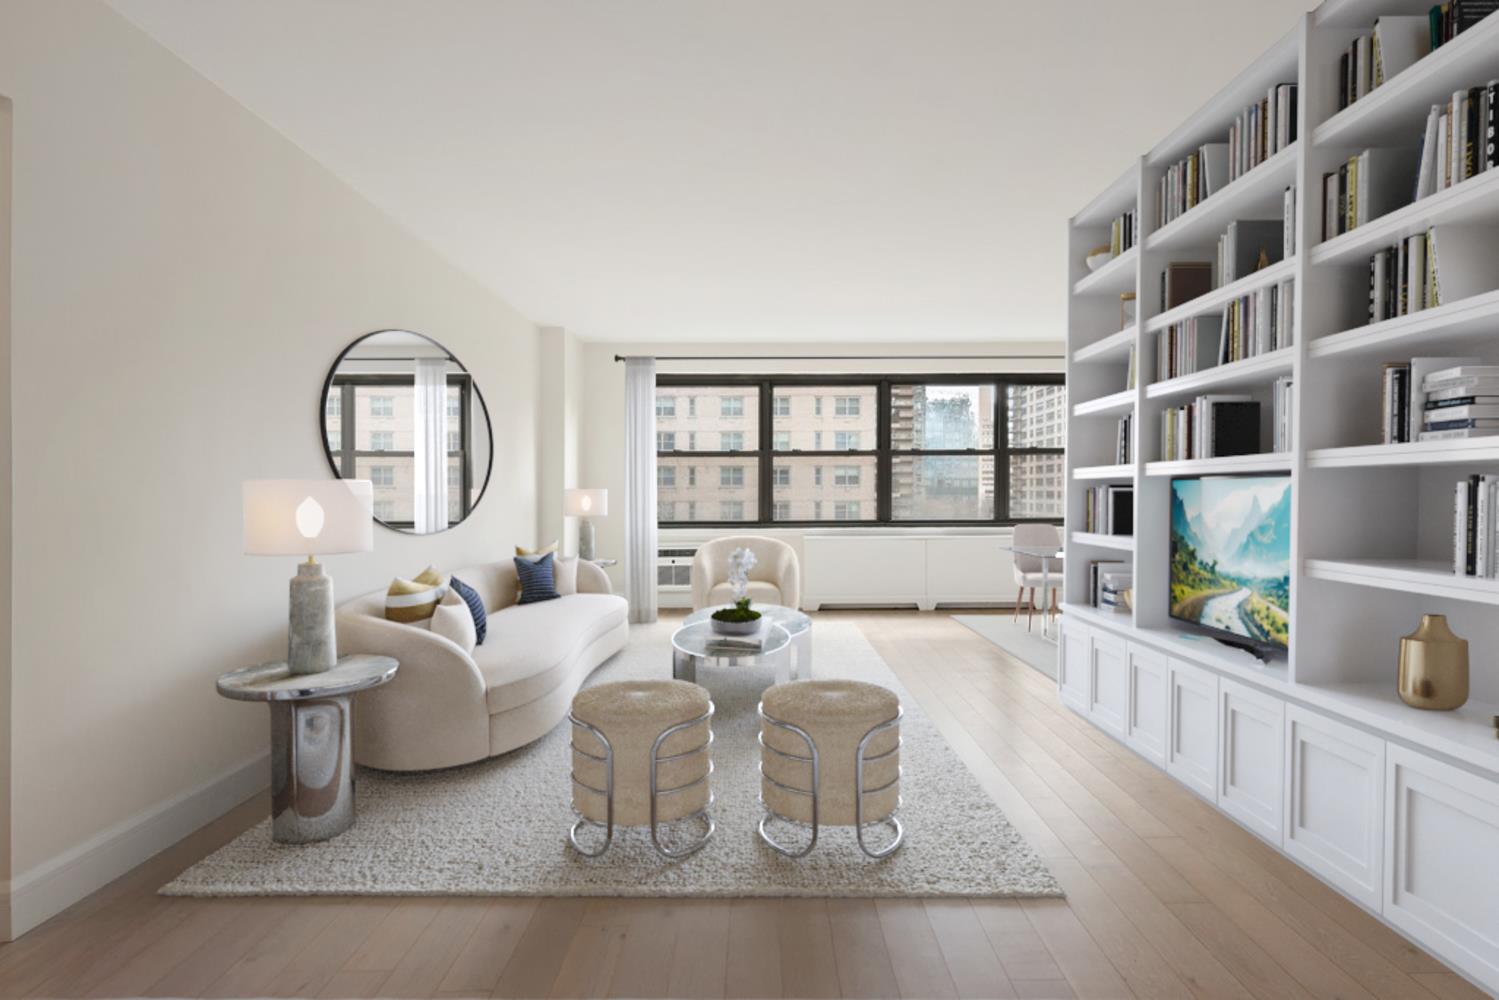 165 West End Avenue 7K, Lincoln Sq, Upper West Side, NYC - 2 Bedrooms  
2 Bathrooms  
5 Rooms - 